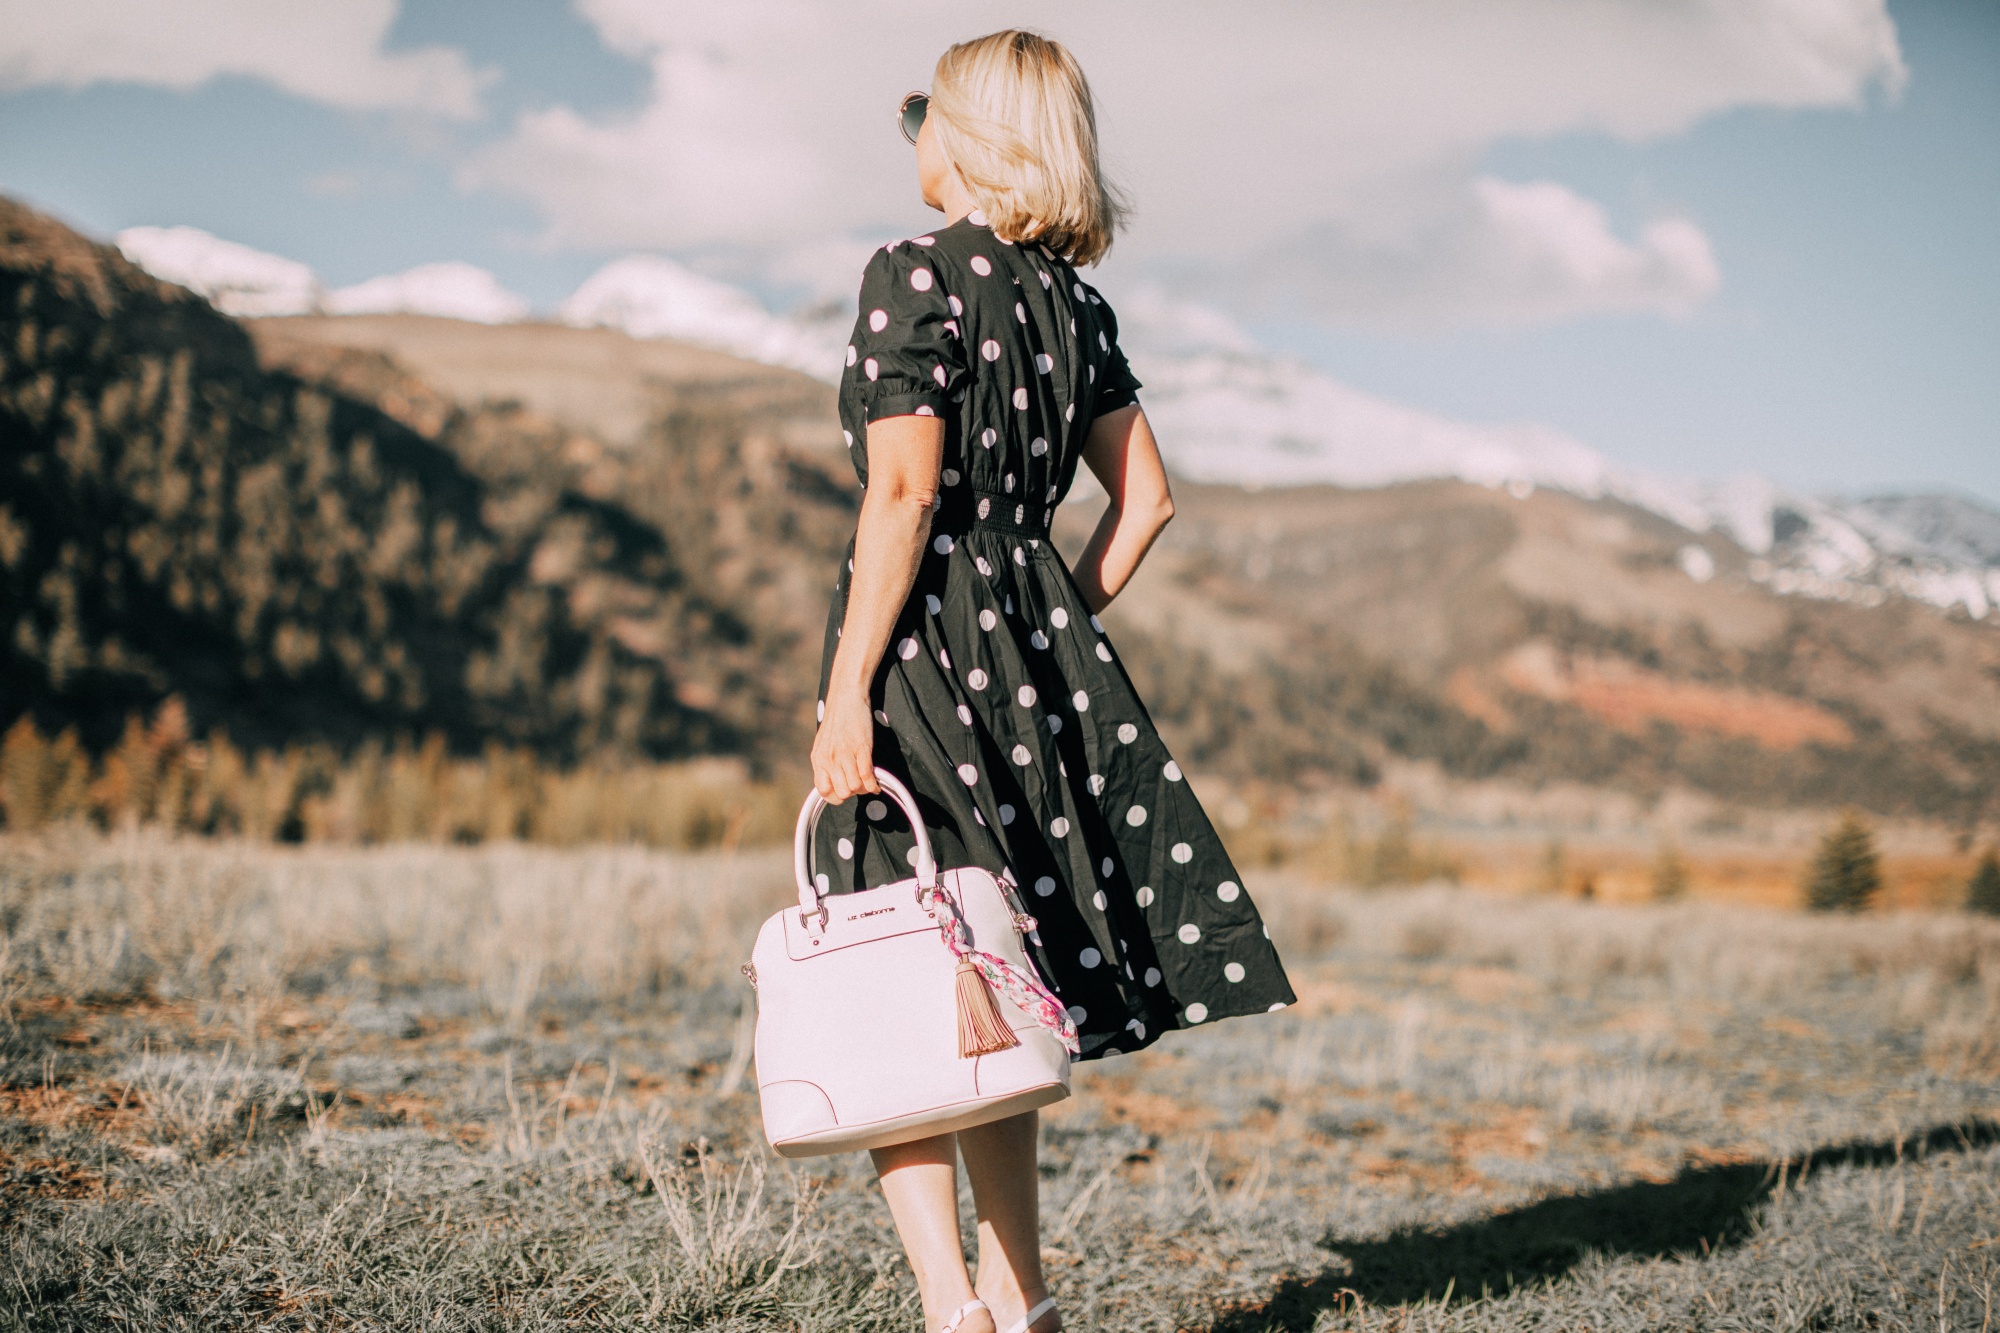 Polka Dot Dresses from JCPenney on fashion blogger Erin Busbee of Busbee Style